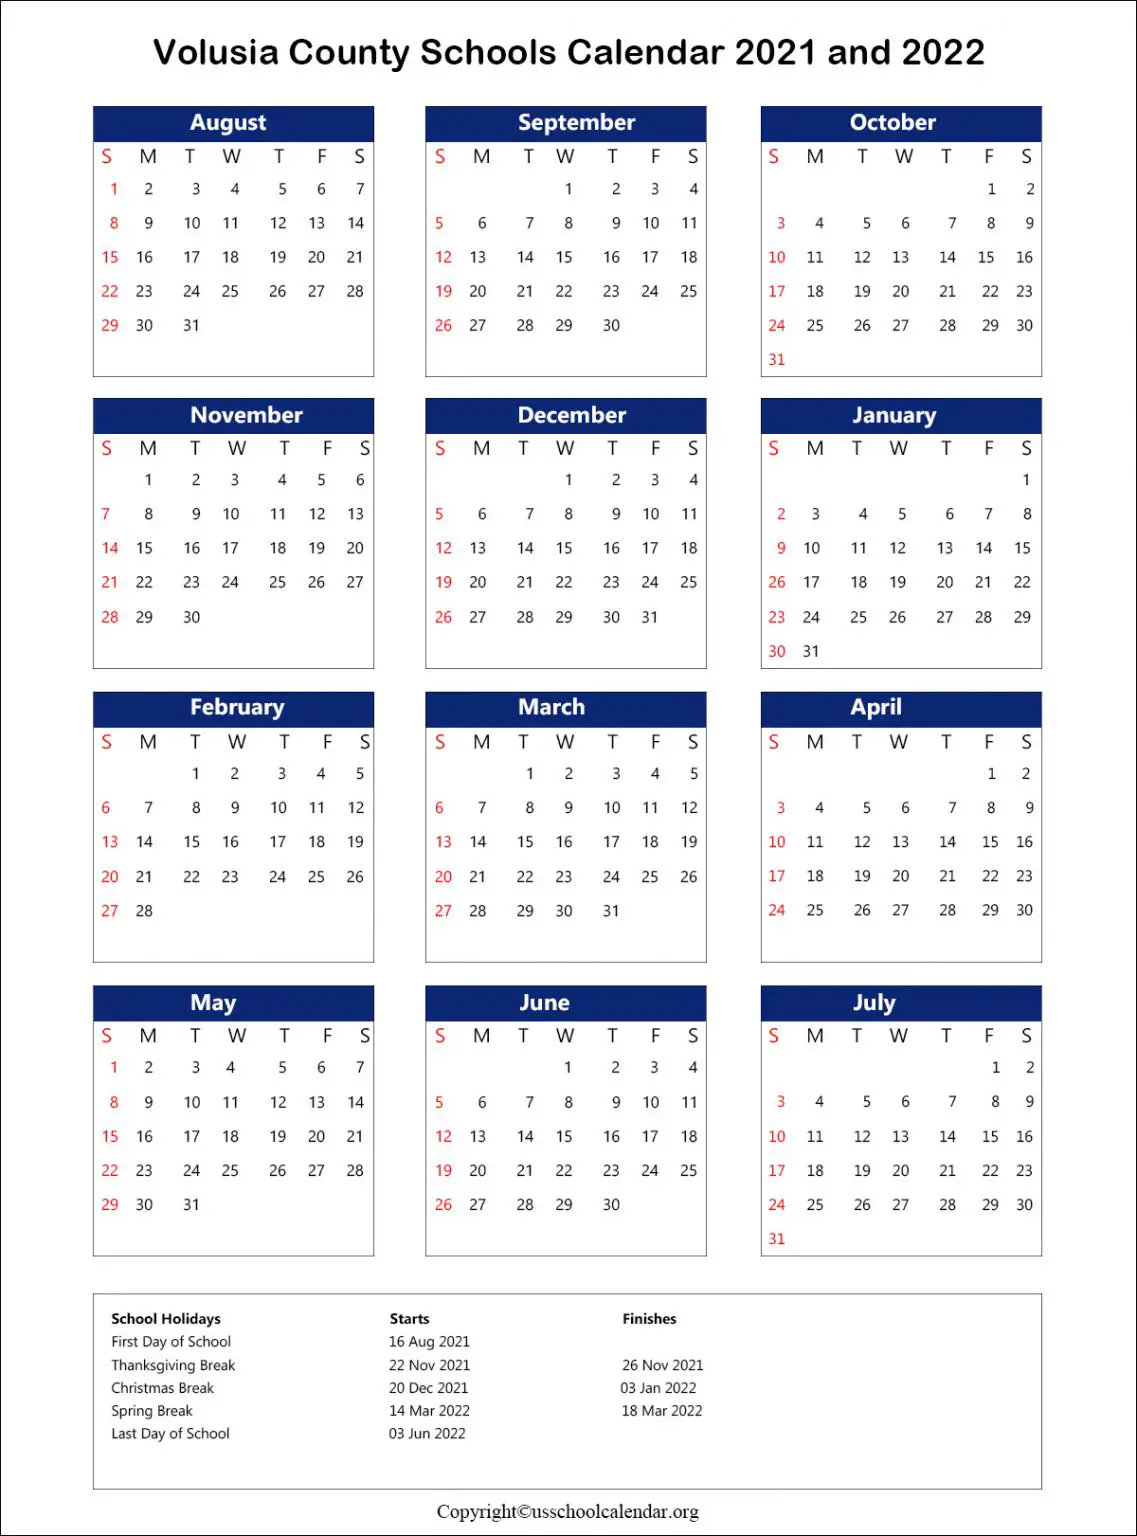 volusia-county-school-calendar-with-holidays-2021-2022